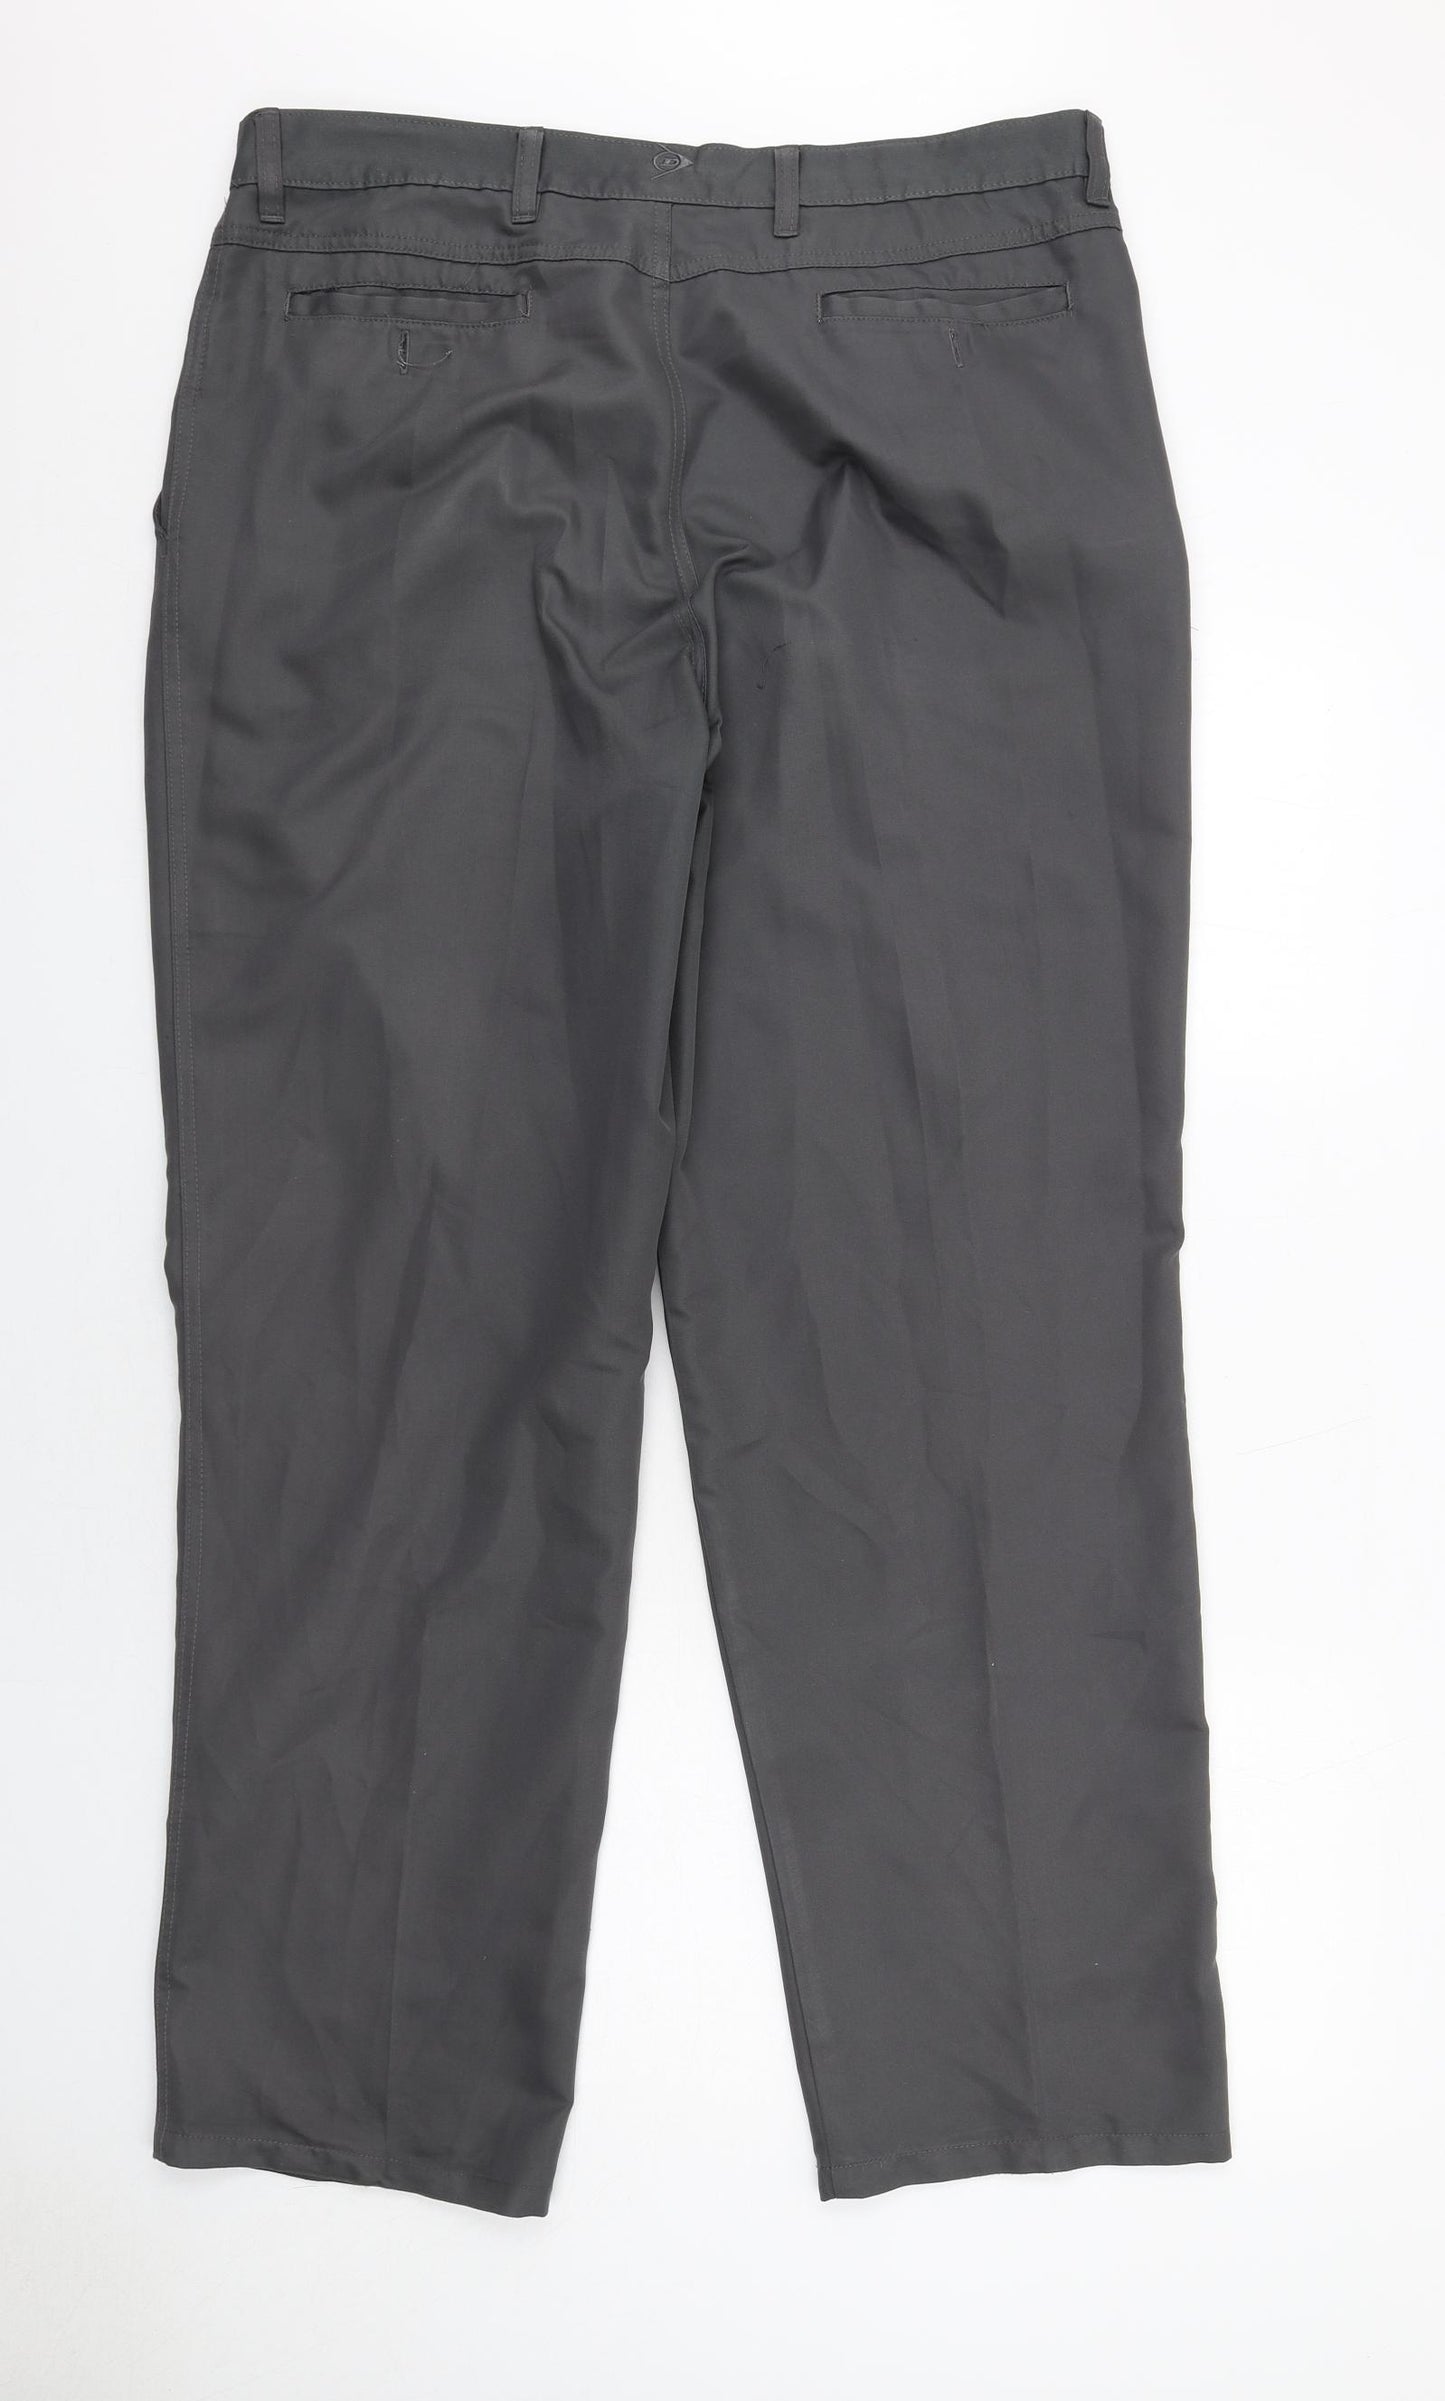 Dunlop Mens Grey Polyester Dress Pants Trousers Size 38 in L33 in Regular Zip